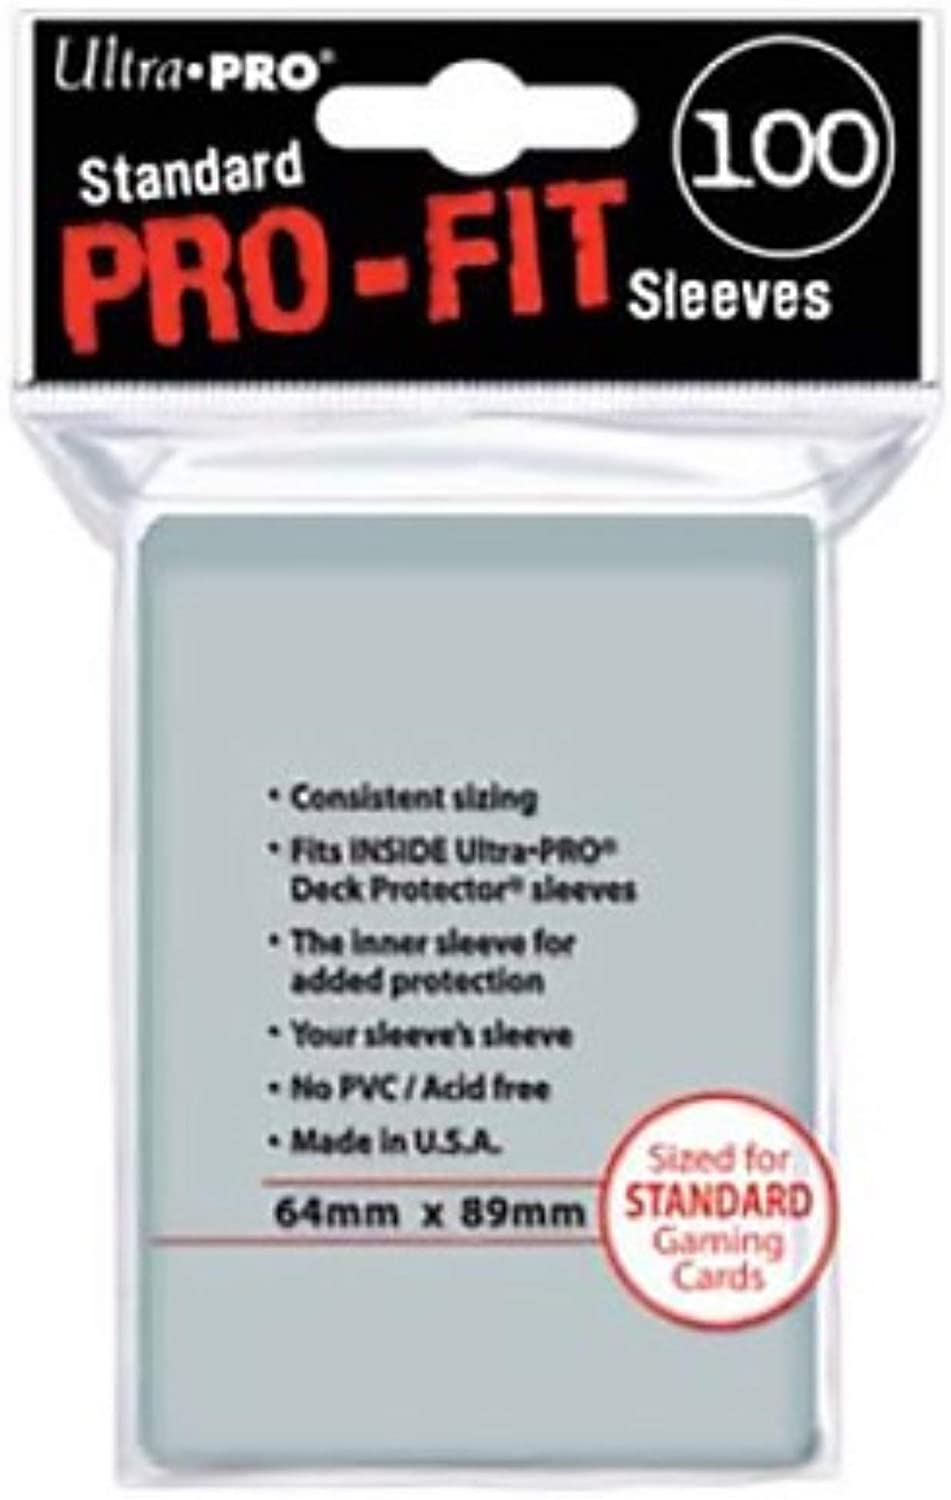 Sleeves Pro Fit Ultra Pro